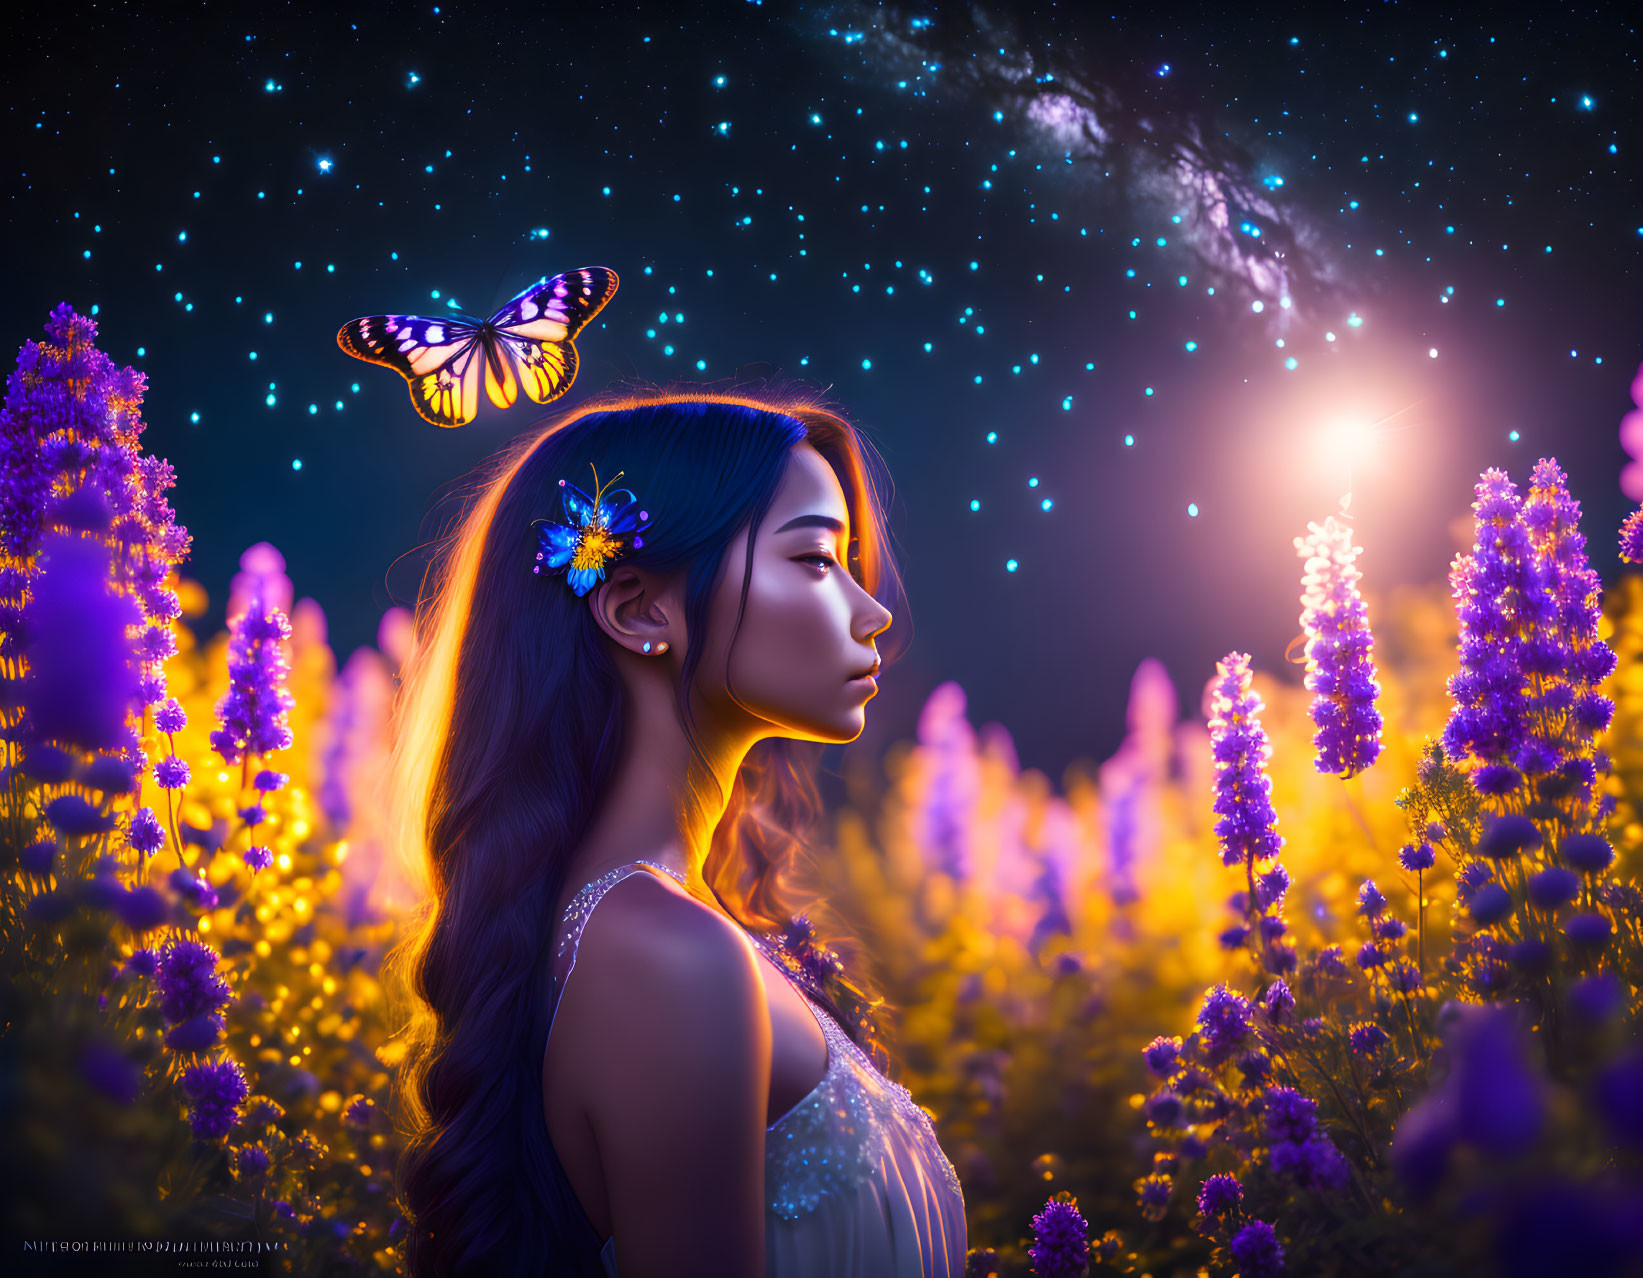 Woman surrounded by purple flowers, stars, butterfly, and mystical light in night field